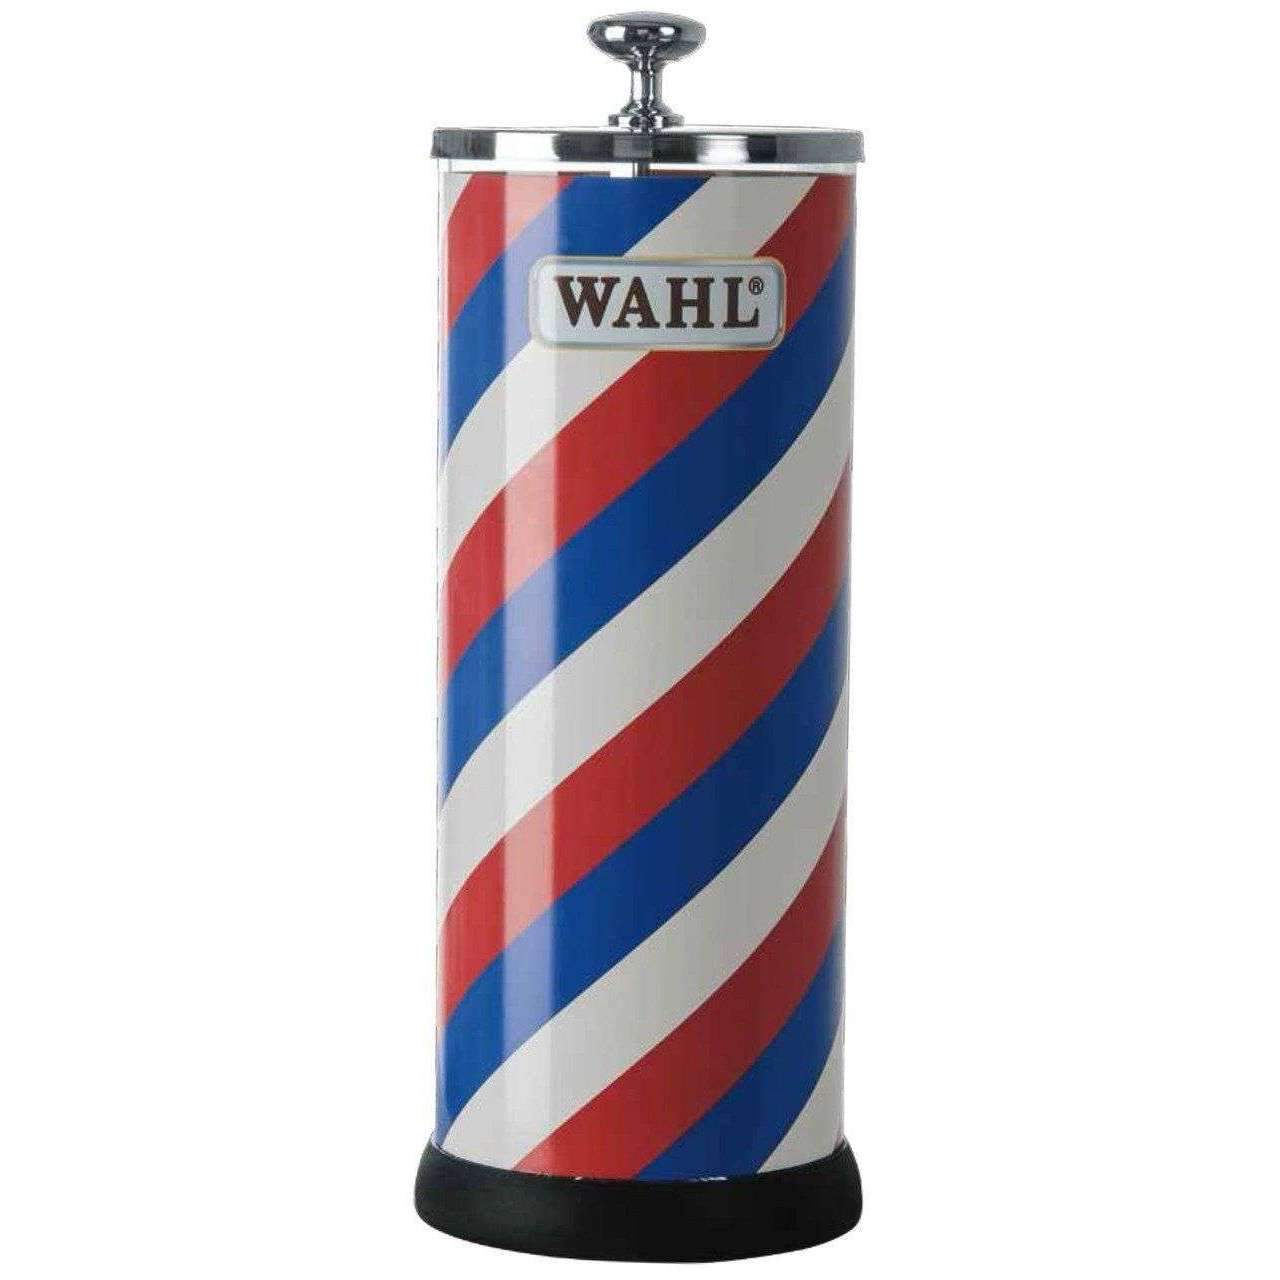 Wahl Disinfectant Jar Barber Pole Style WA56714,Salon Supplies To Your Door